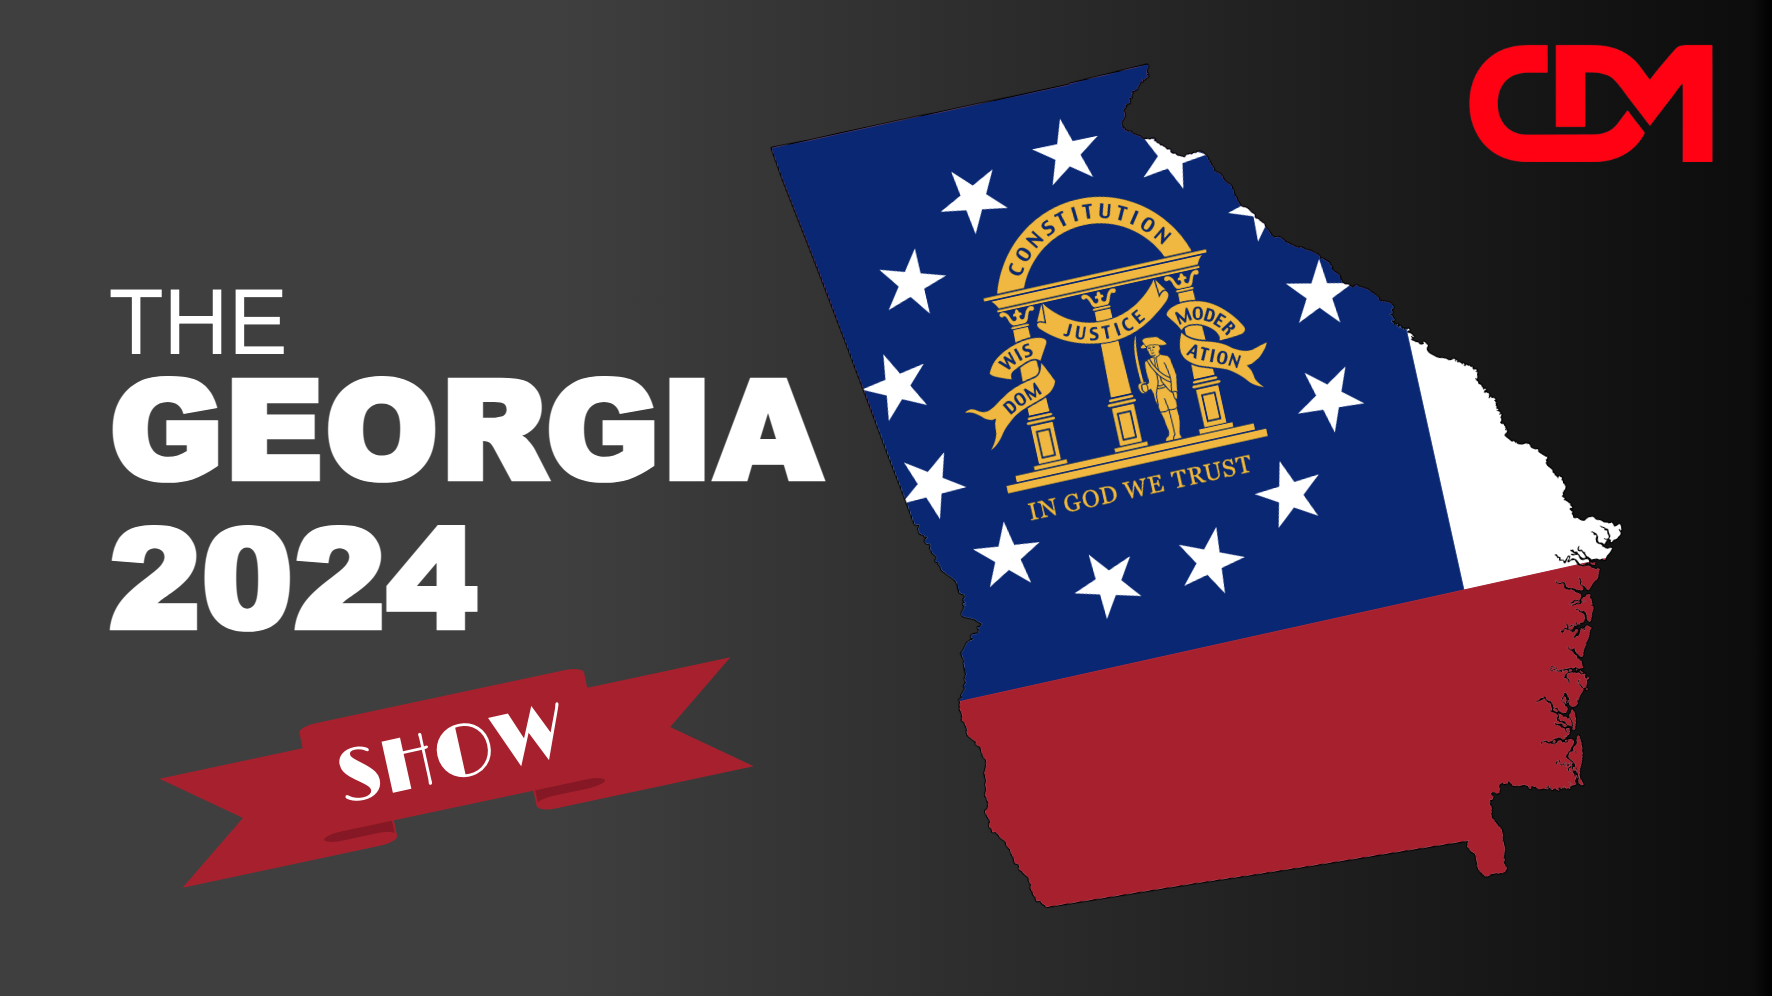 LIVE 7pm EST: The Georgia 2024 Show! Candidates Tell Their Plans w/ L Todd Wood